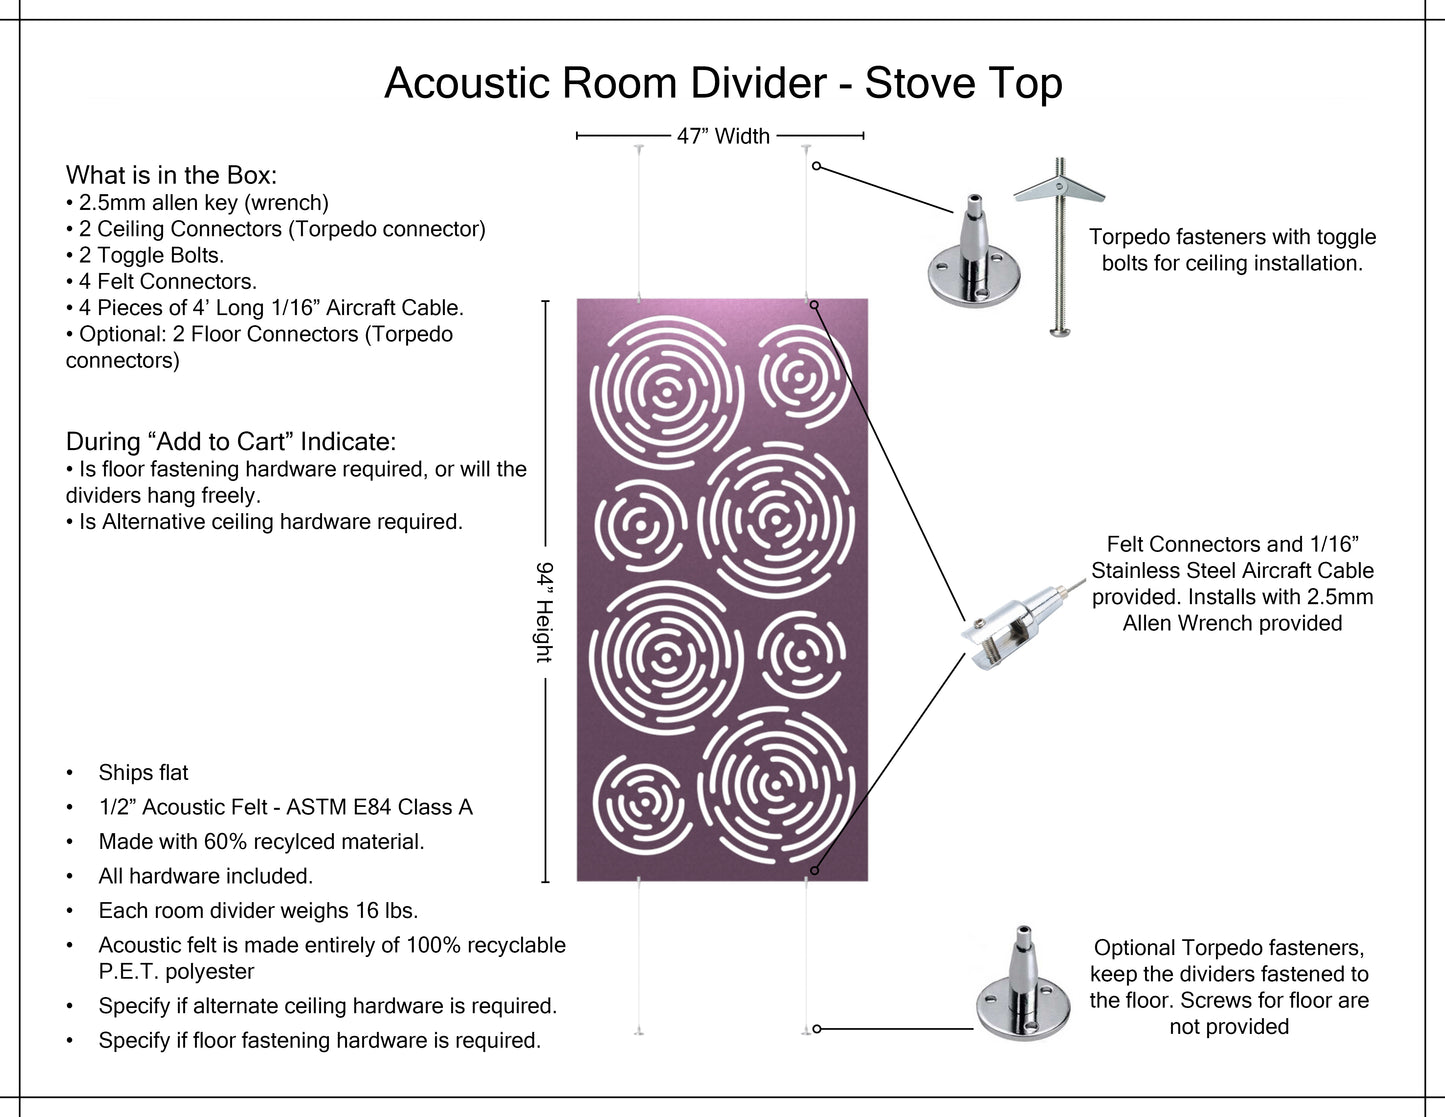 4x8 Acoustic Room Divider - Stove Top